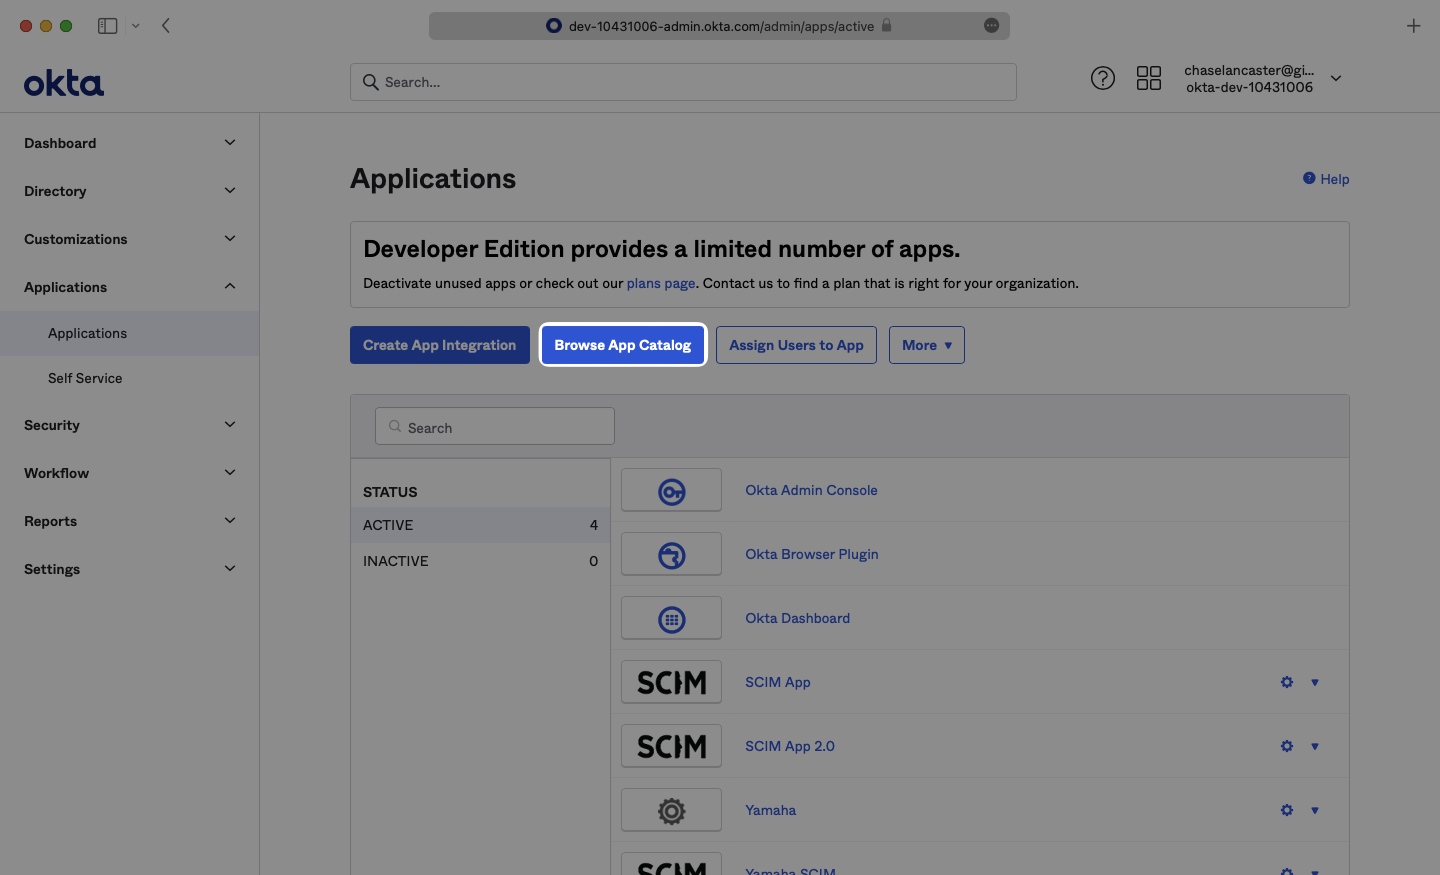 A screenshot showing where to select "Browse App Catalog" in Okta.